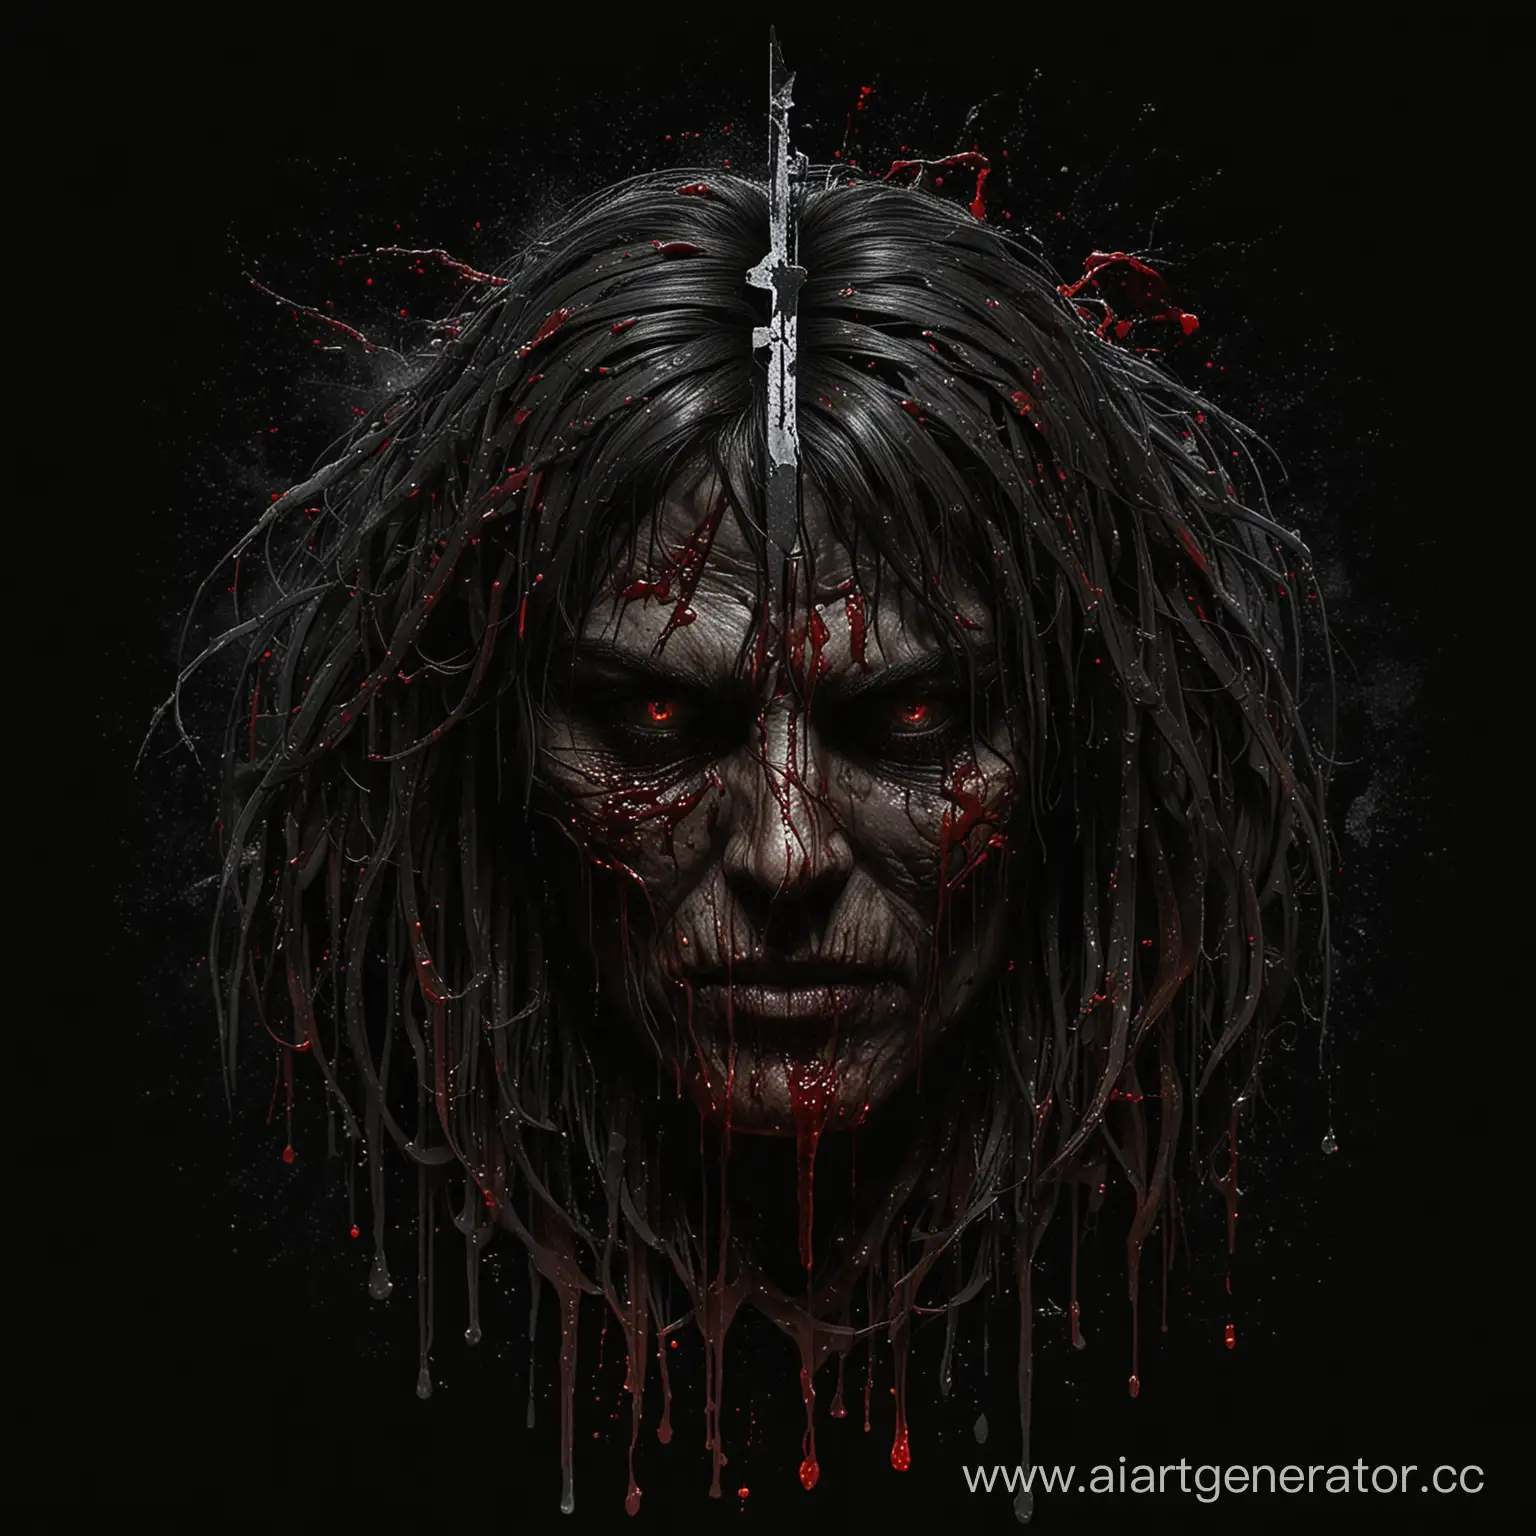 Sinister-H4teful-Figure-on-a-Dark-Background-with-Blood-Streaks